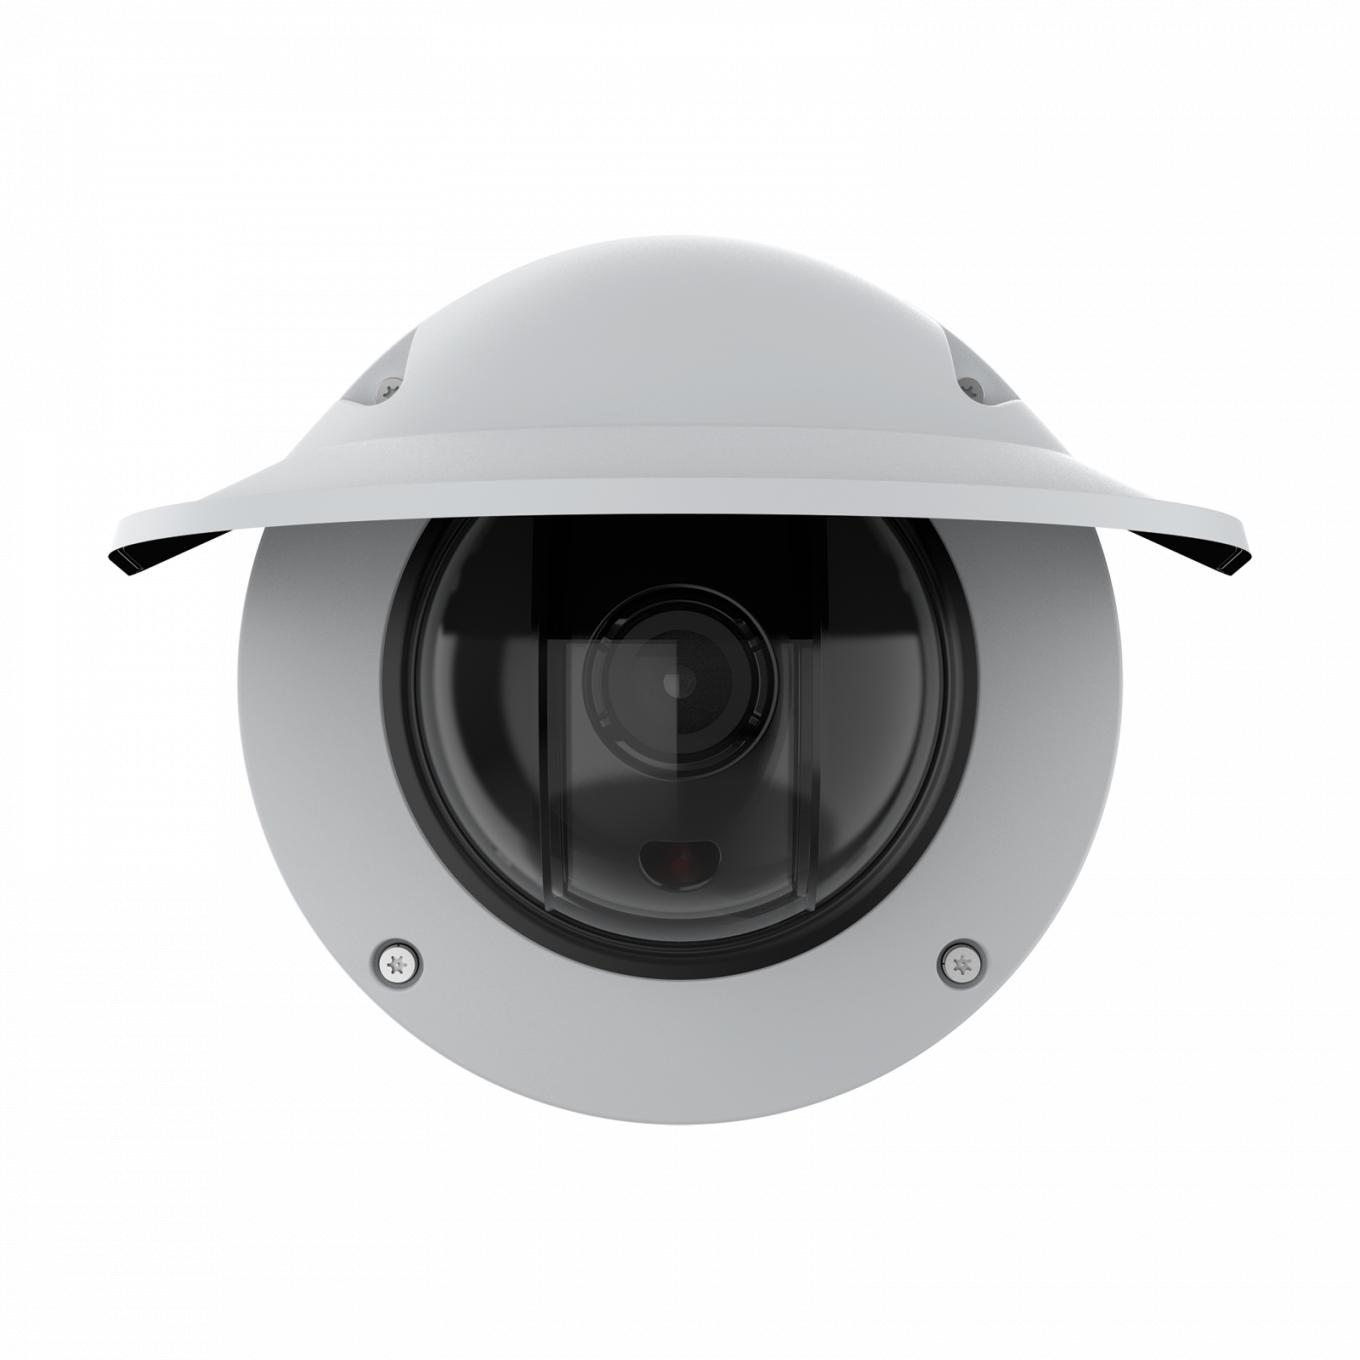 AXIS Q3538-LVE Dome Camera (正面から見た図)